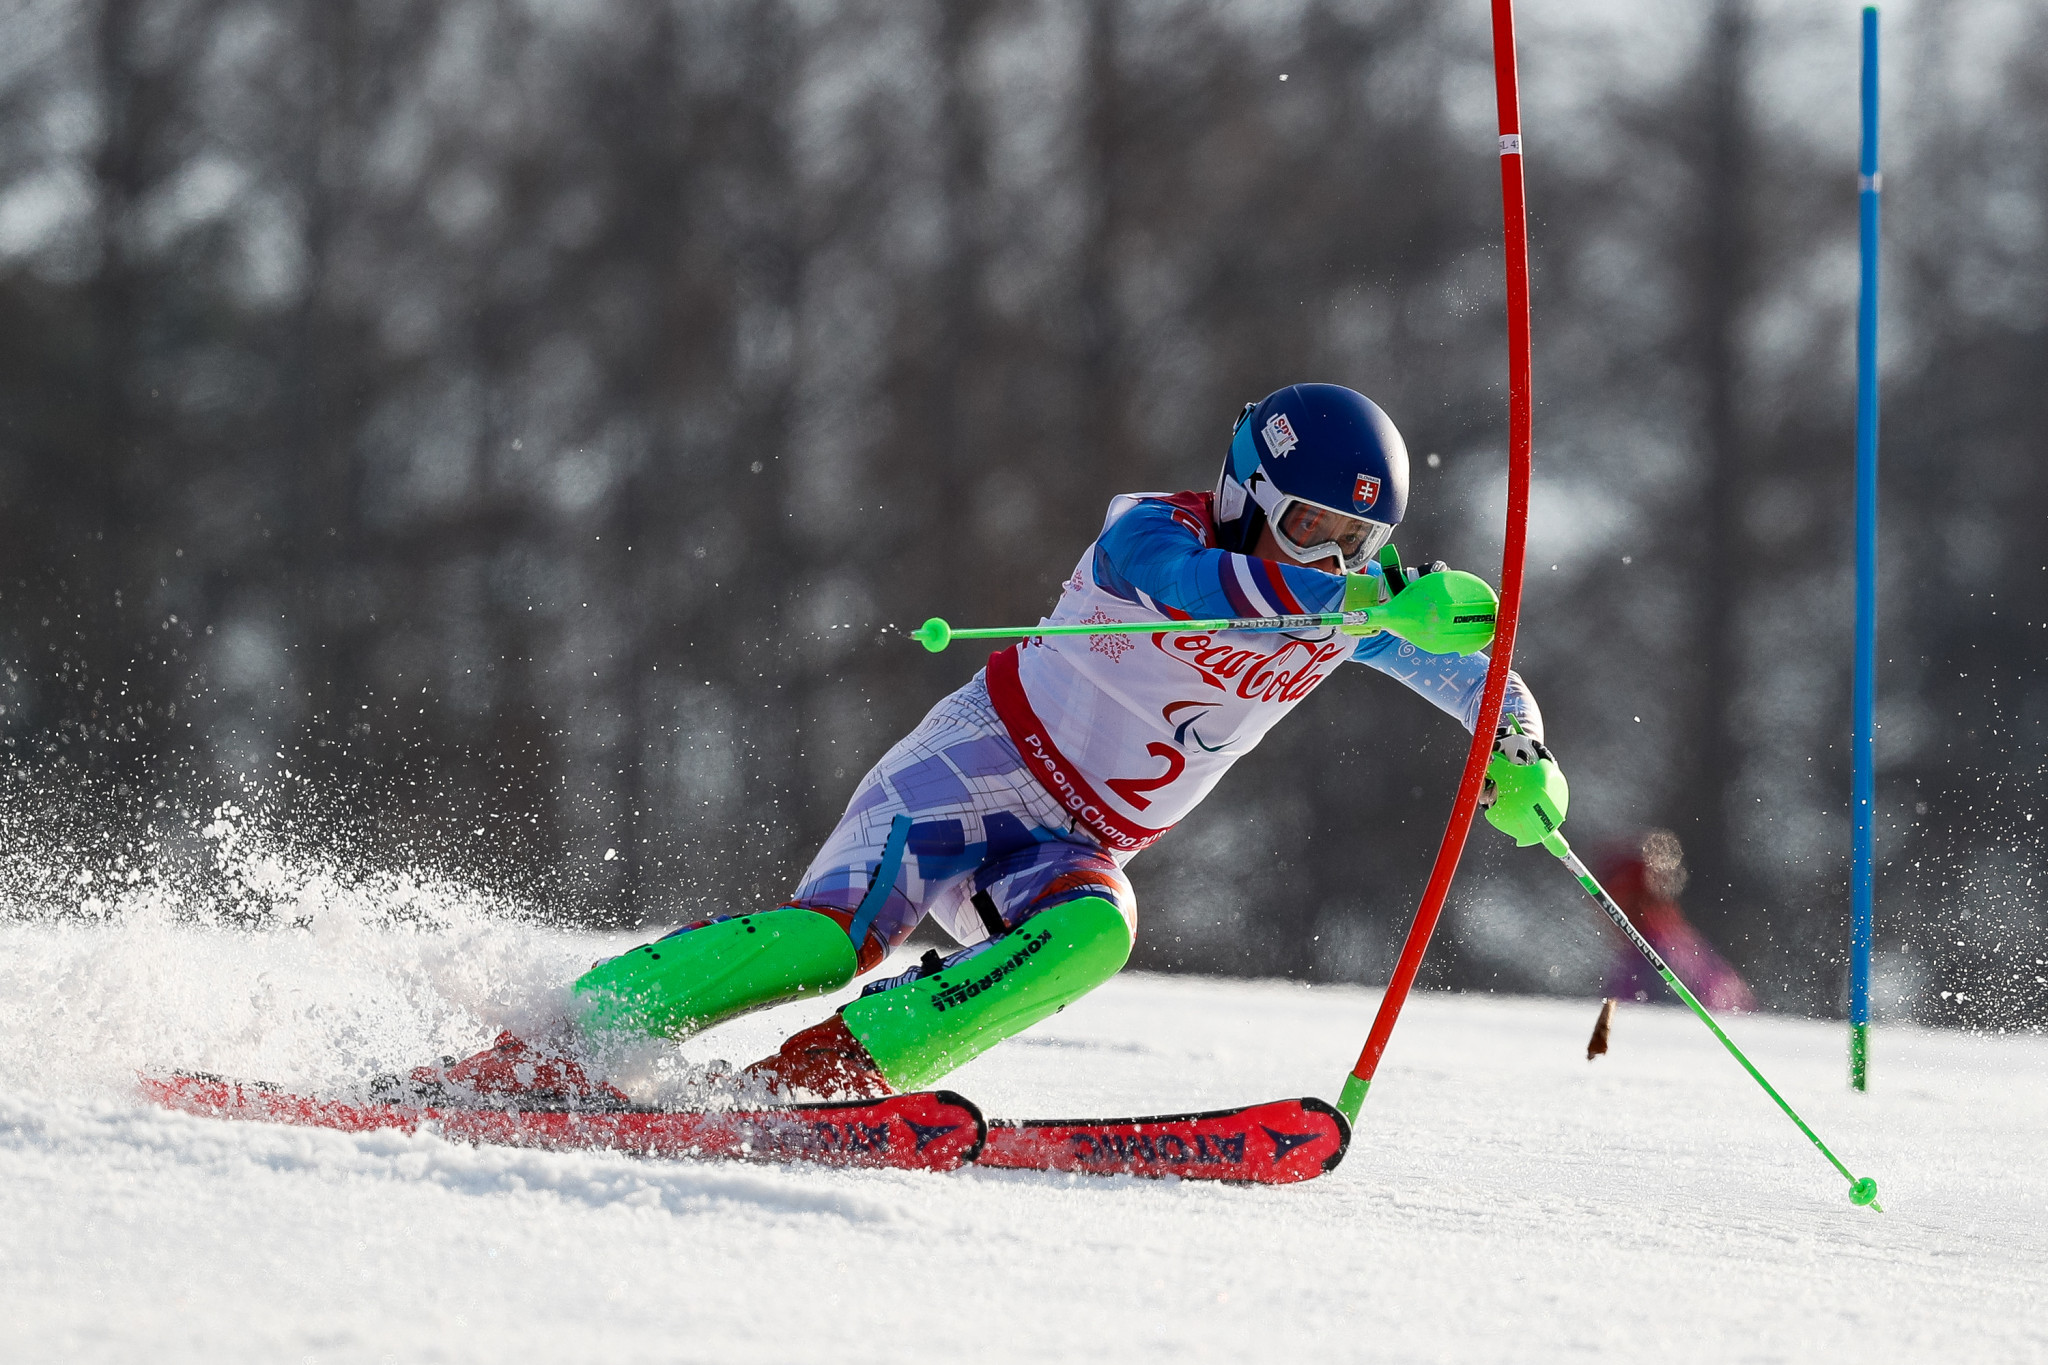 Slovakia’s Miroslav Haraus was among the six slalom gold medallists on the last day of the World Para Alpine Skiing World Cup Final in Morzine in France ©Getty Images